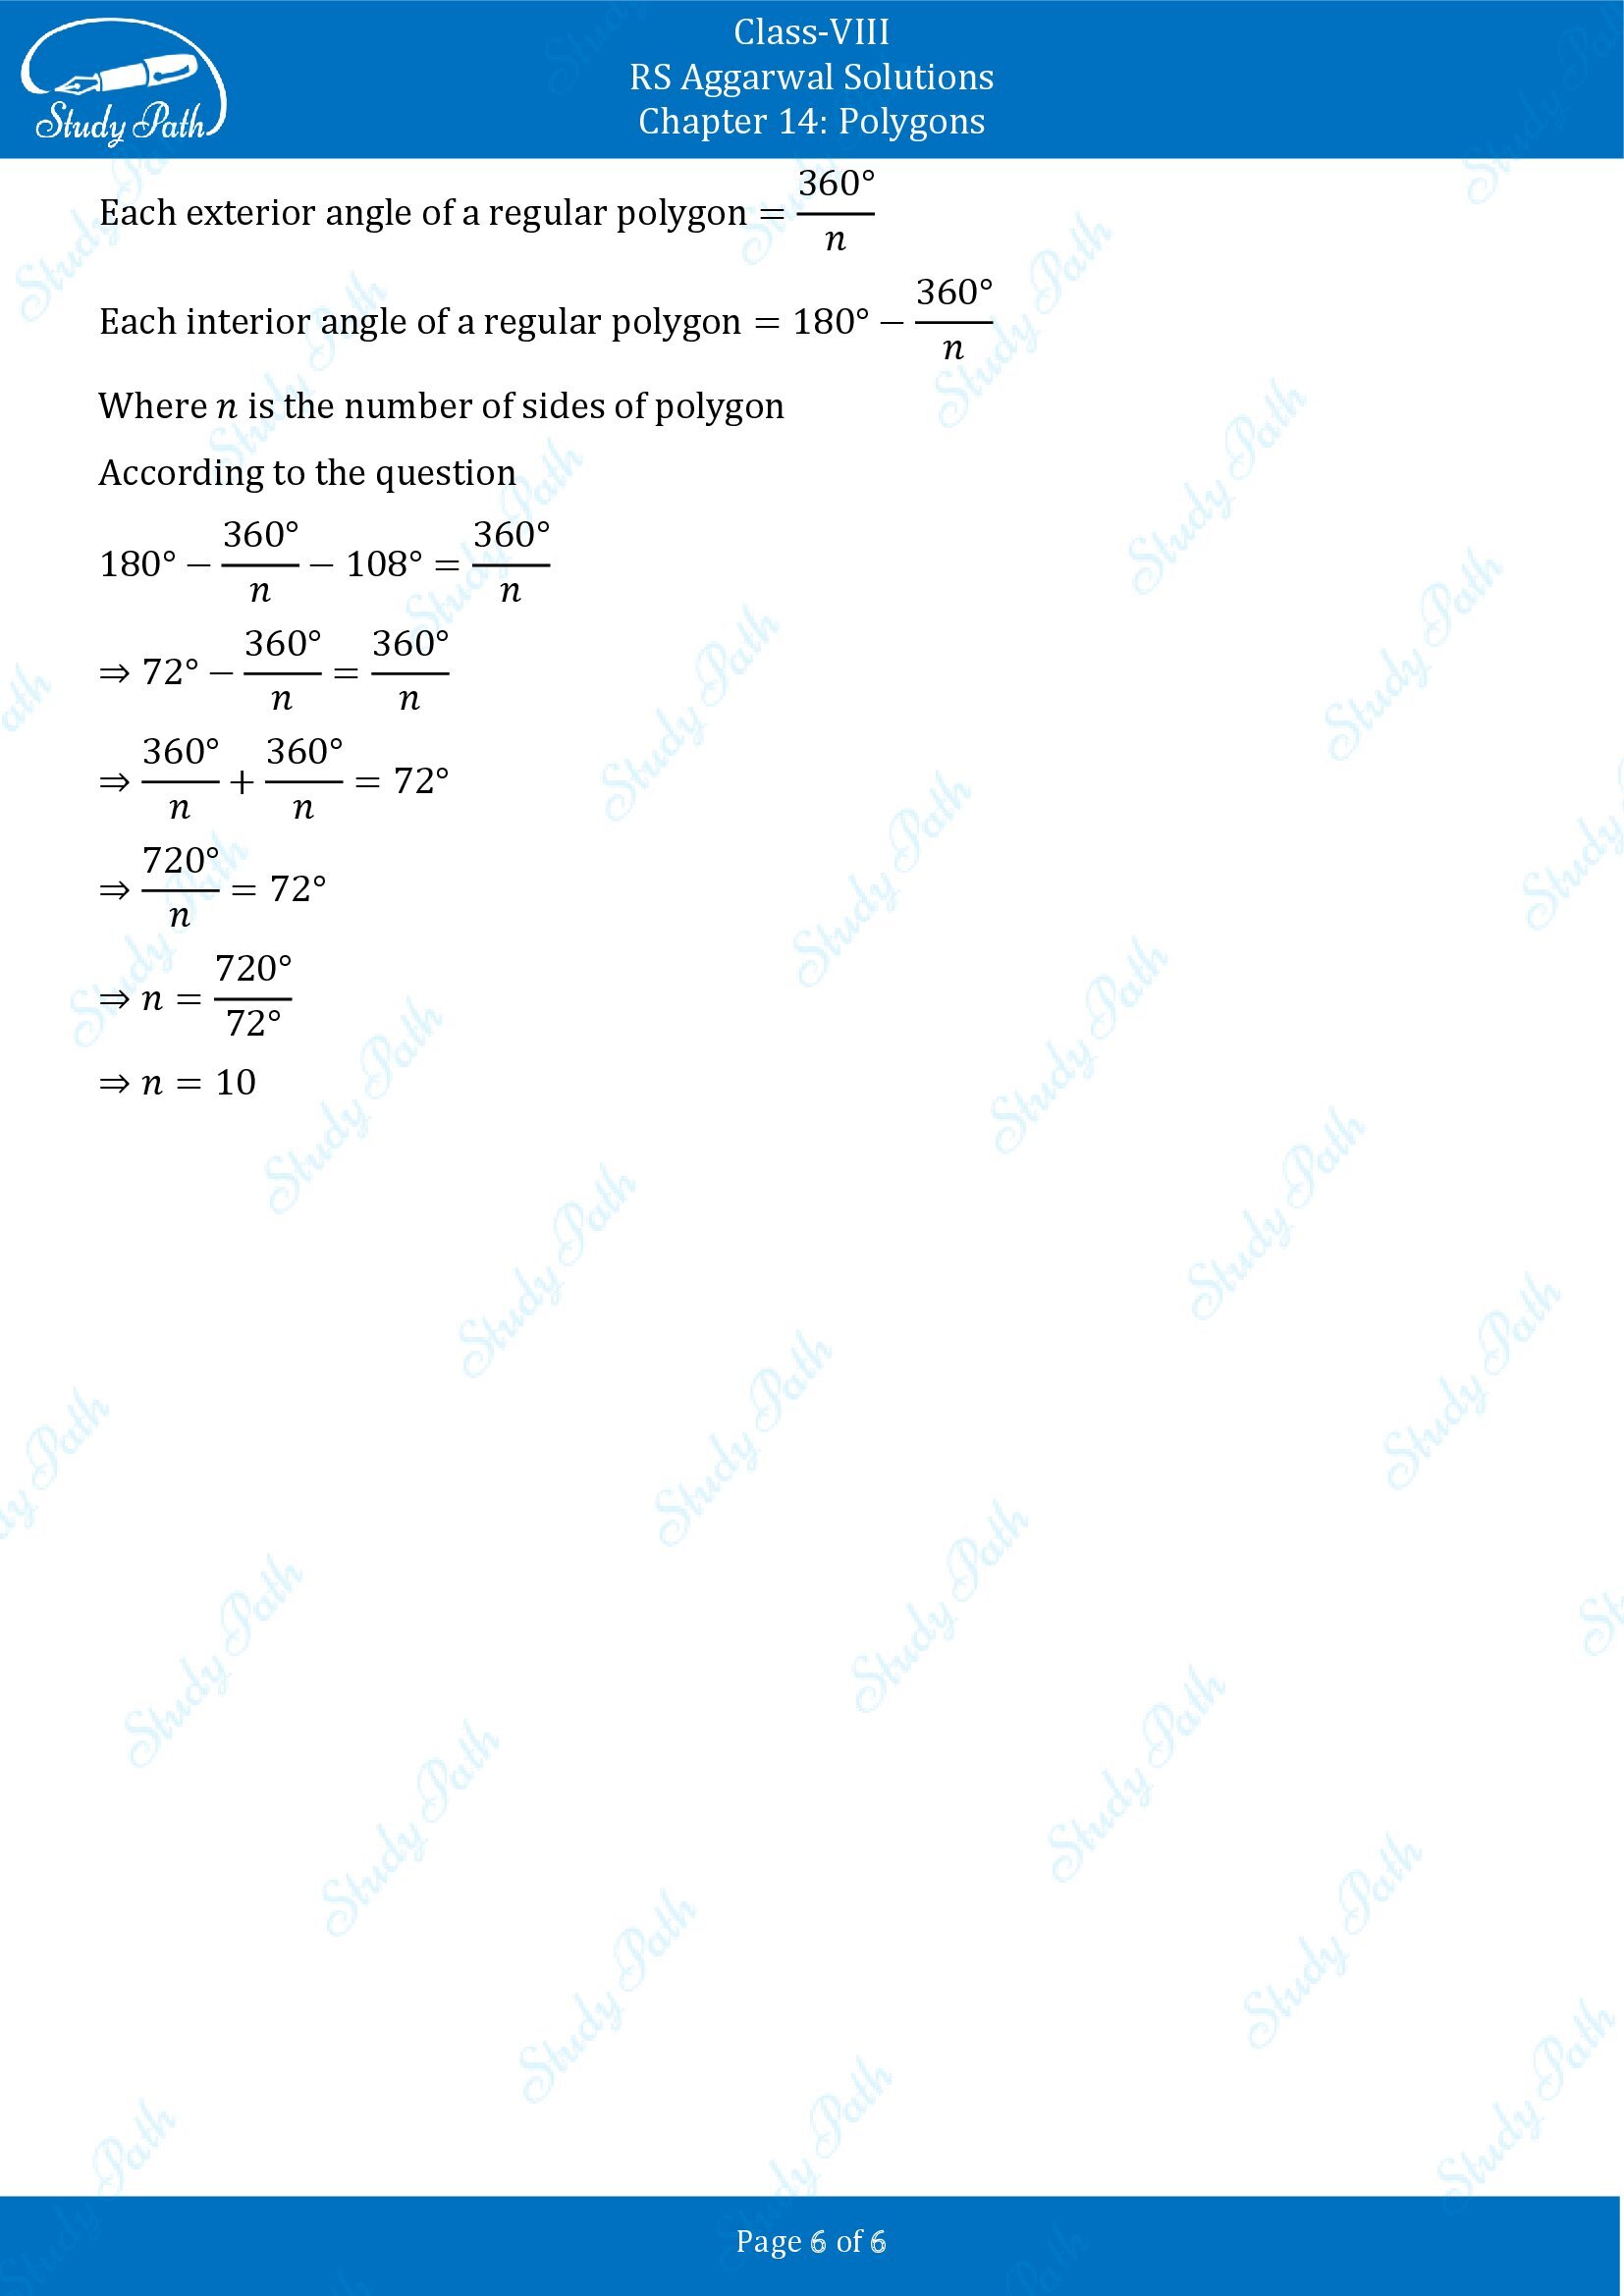 RS Aggarwal Solutions Class 8 Chapter 14 Polygons Exercise 14B MCQs 00006